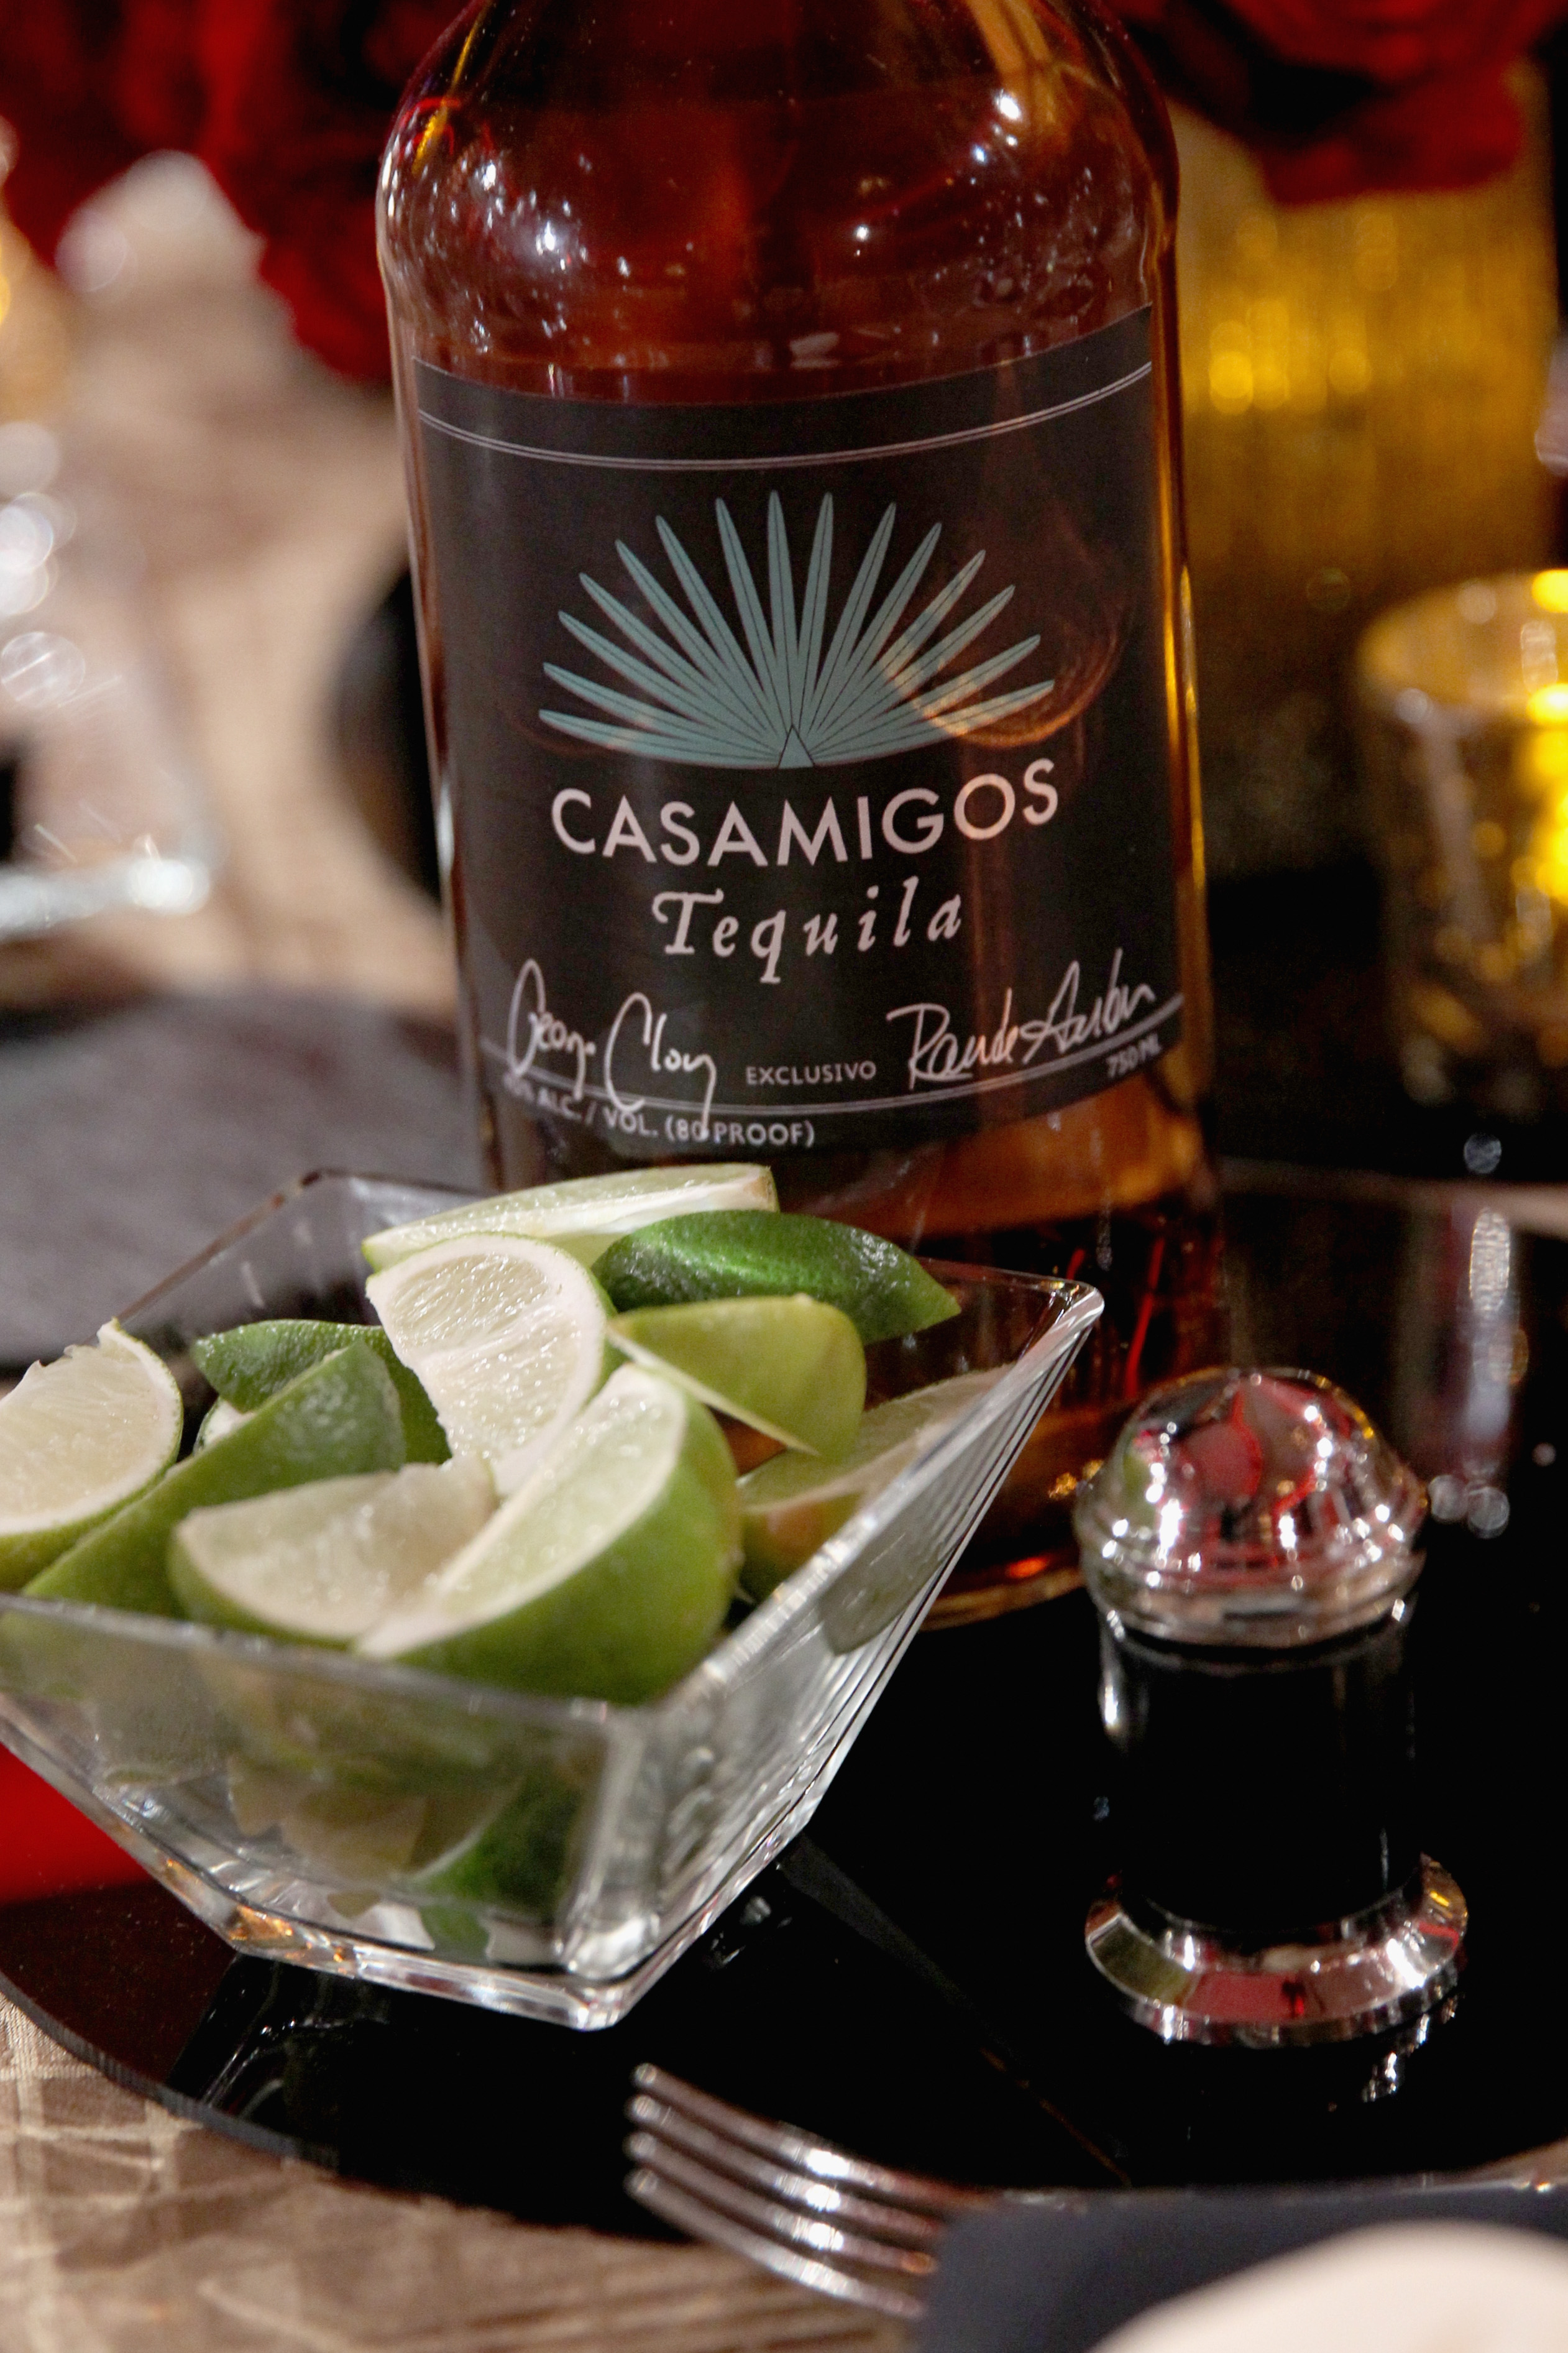 CASAMIGOS Tequila At The 18th Annual Hollywood Film Awards